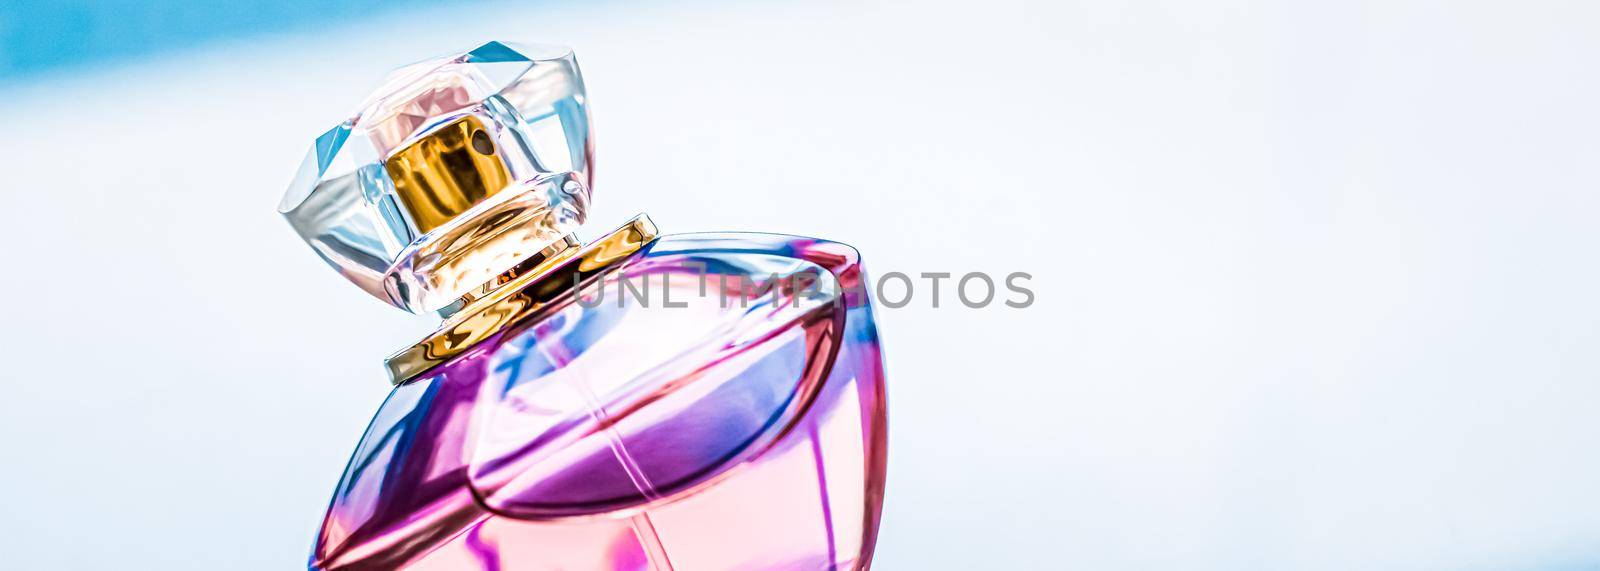 Perfume bottle on glossy background, sweet floral scent, glamour fragrance and eau de parfum as holiday gift and luxury beauty cosmetics brand design by Anneleven